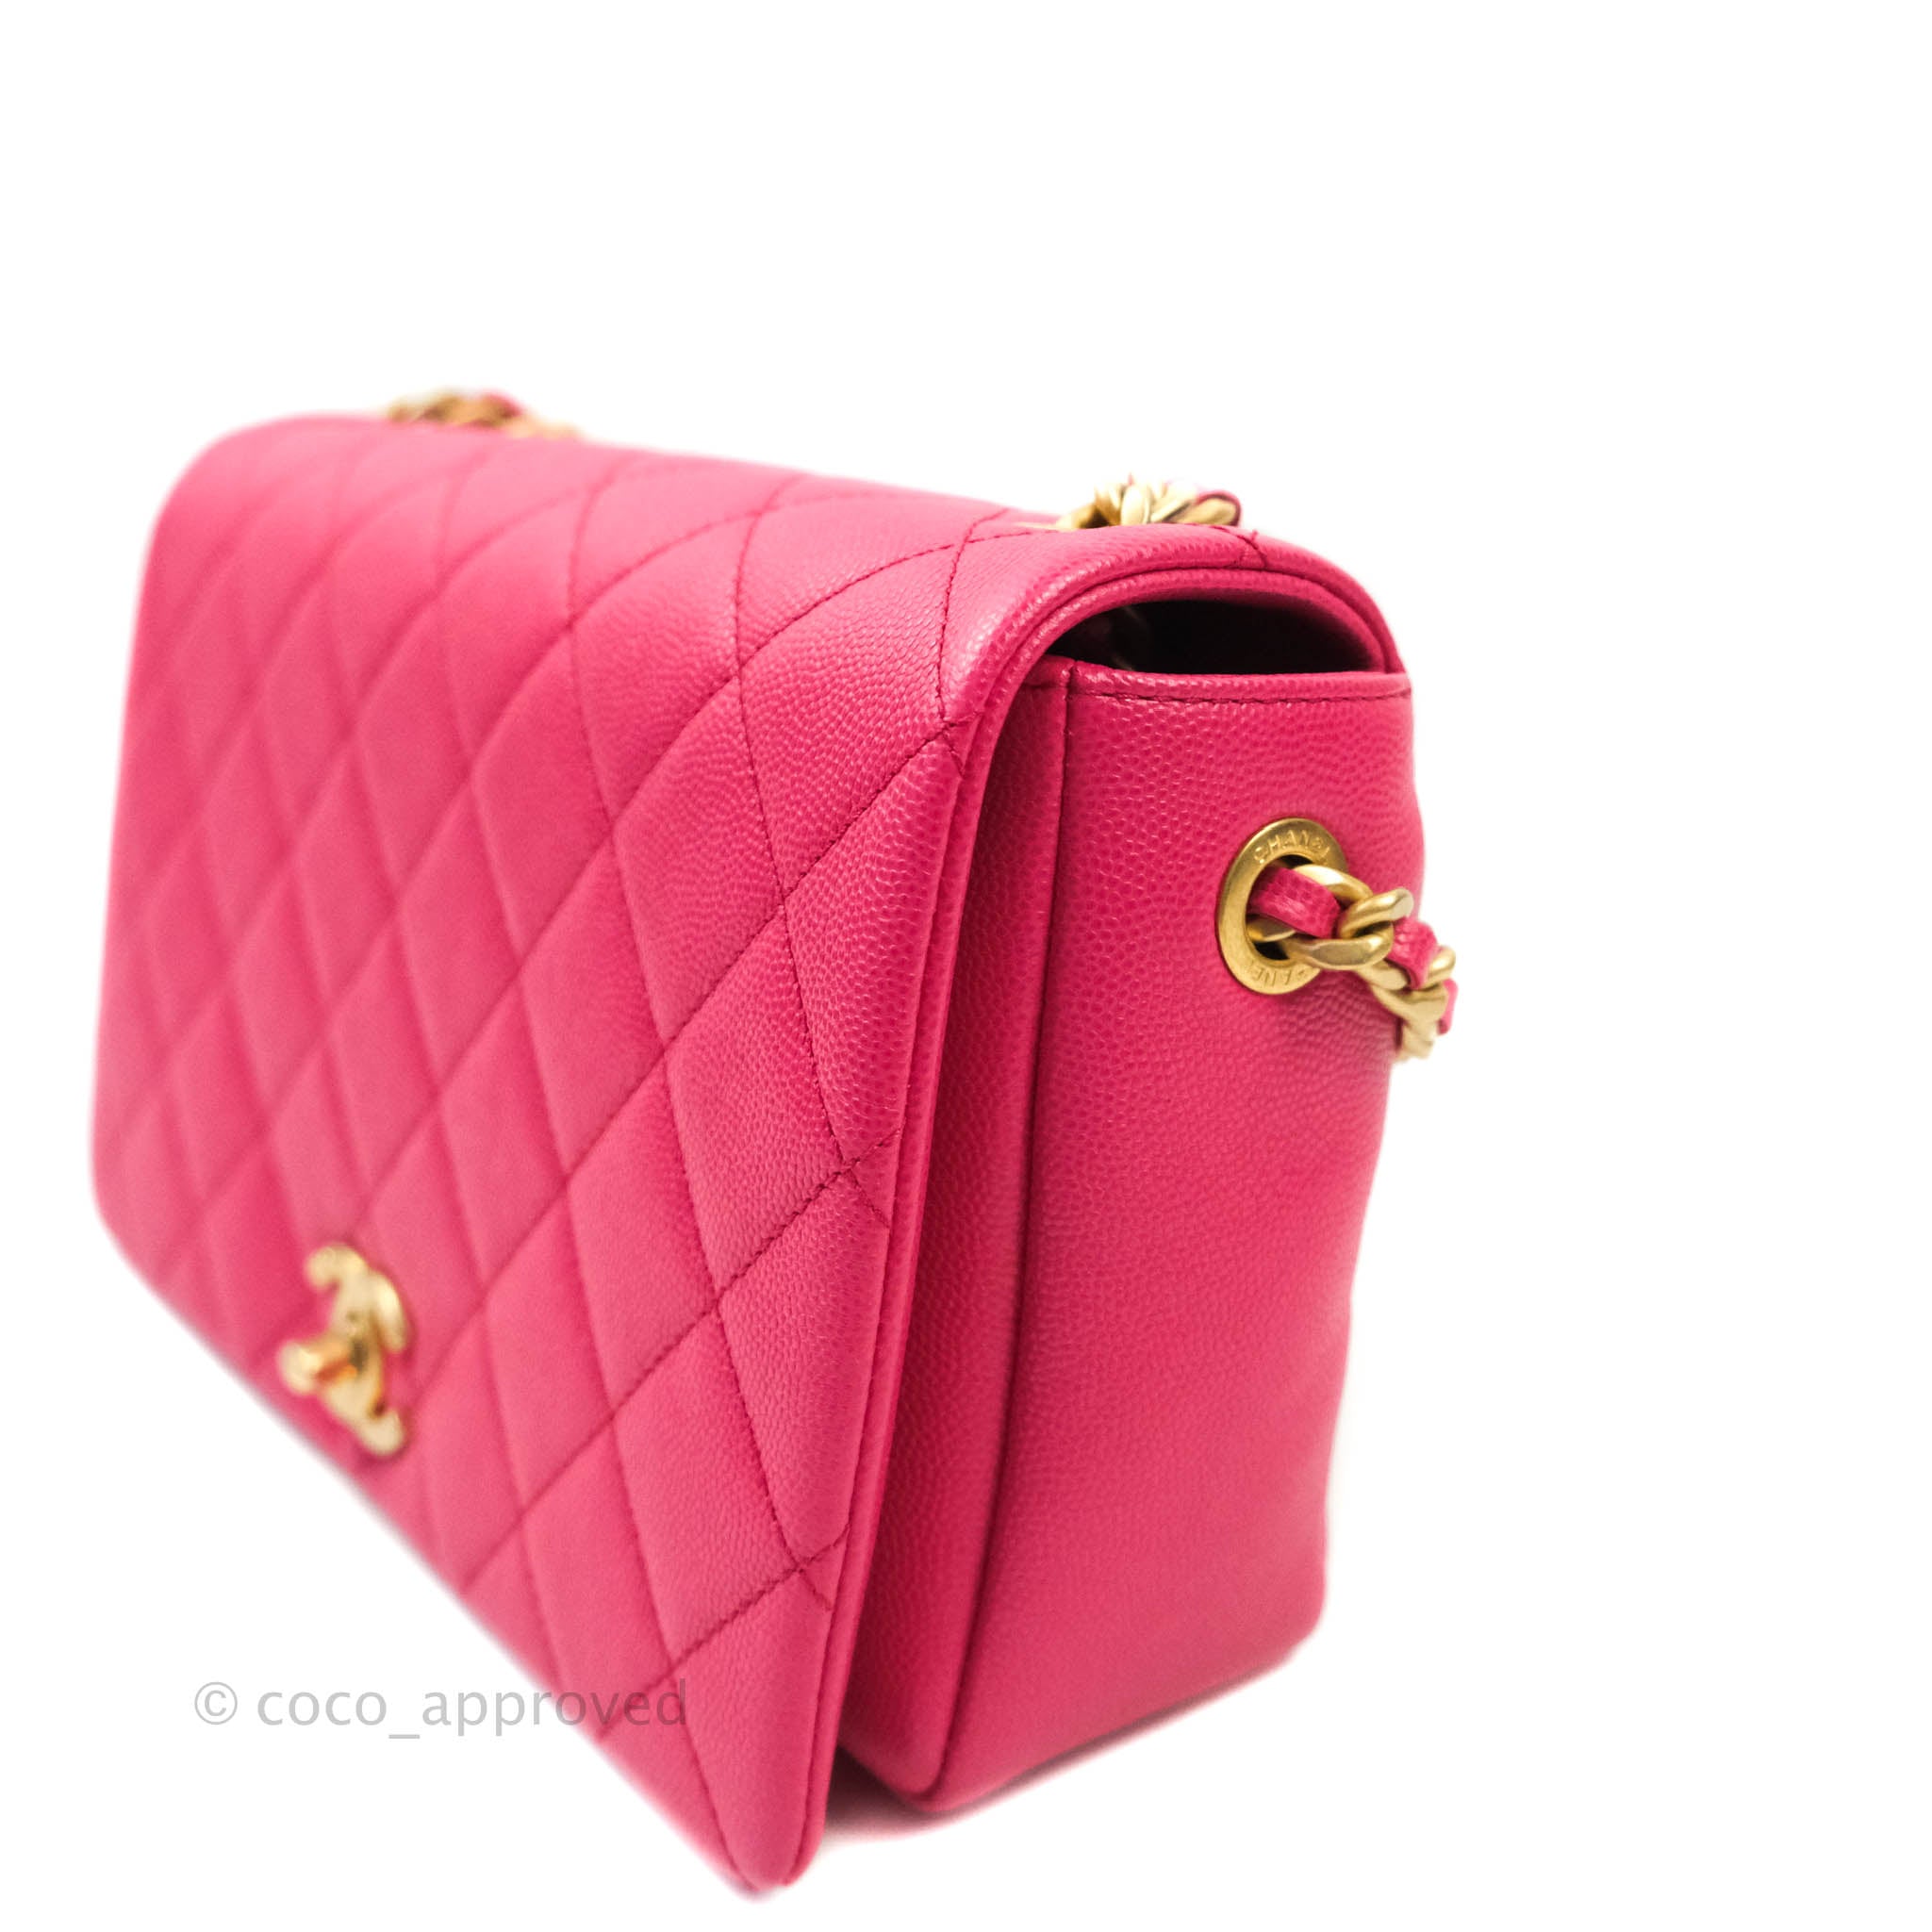 Chanel Pearlecent Pink Quilted Vintage Small Tote Bag  STYLISHTOP